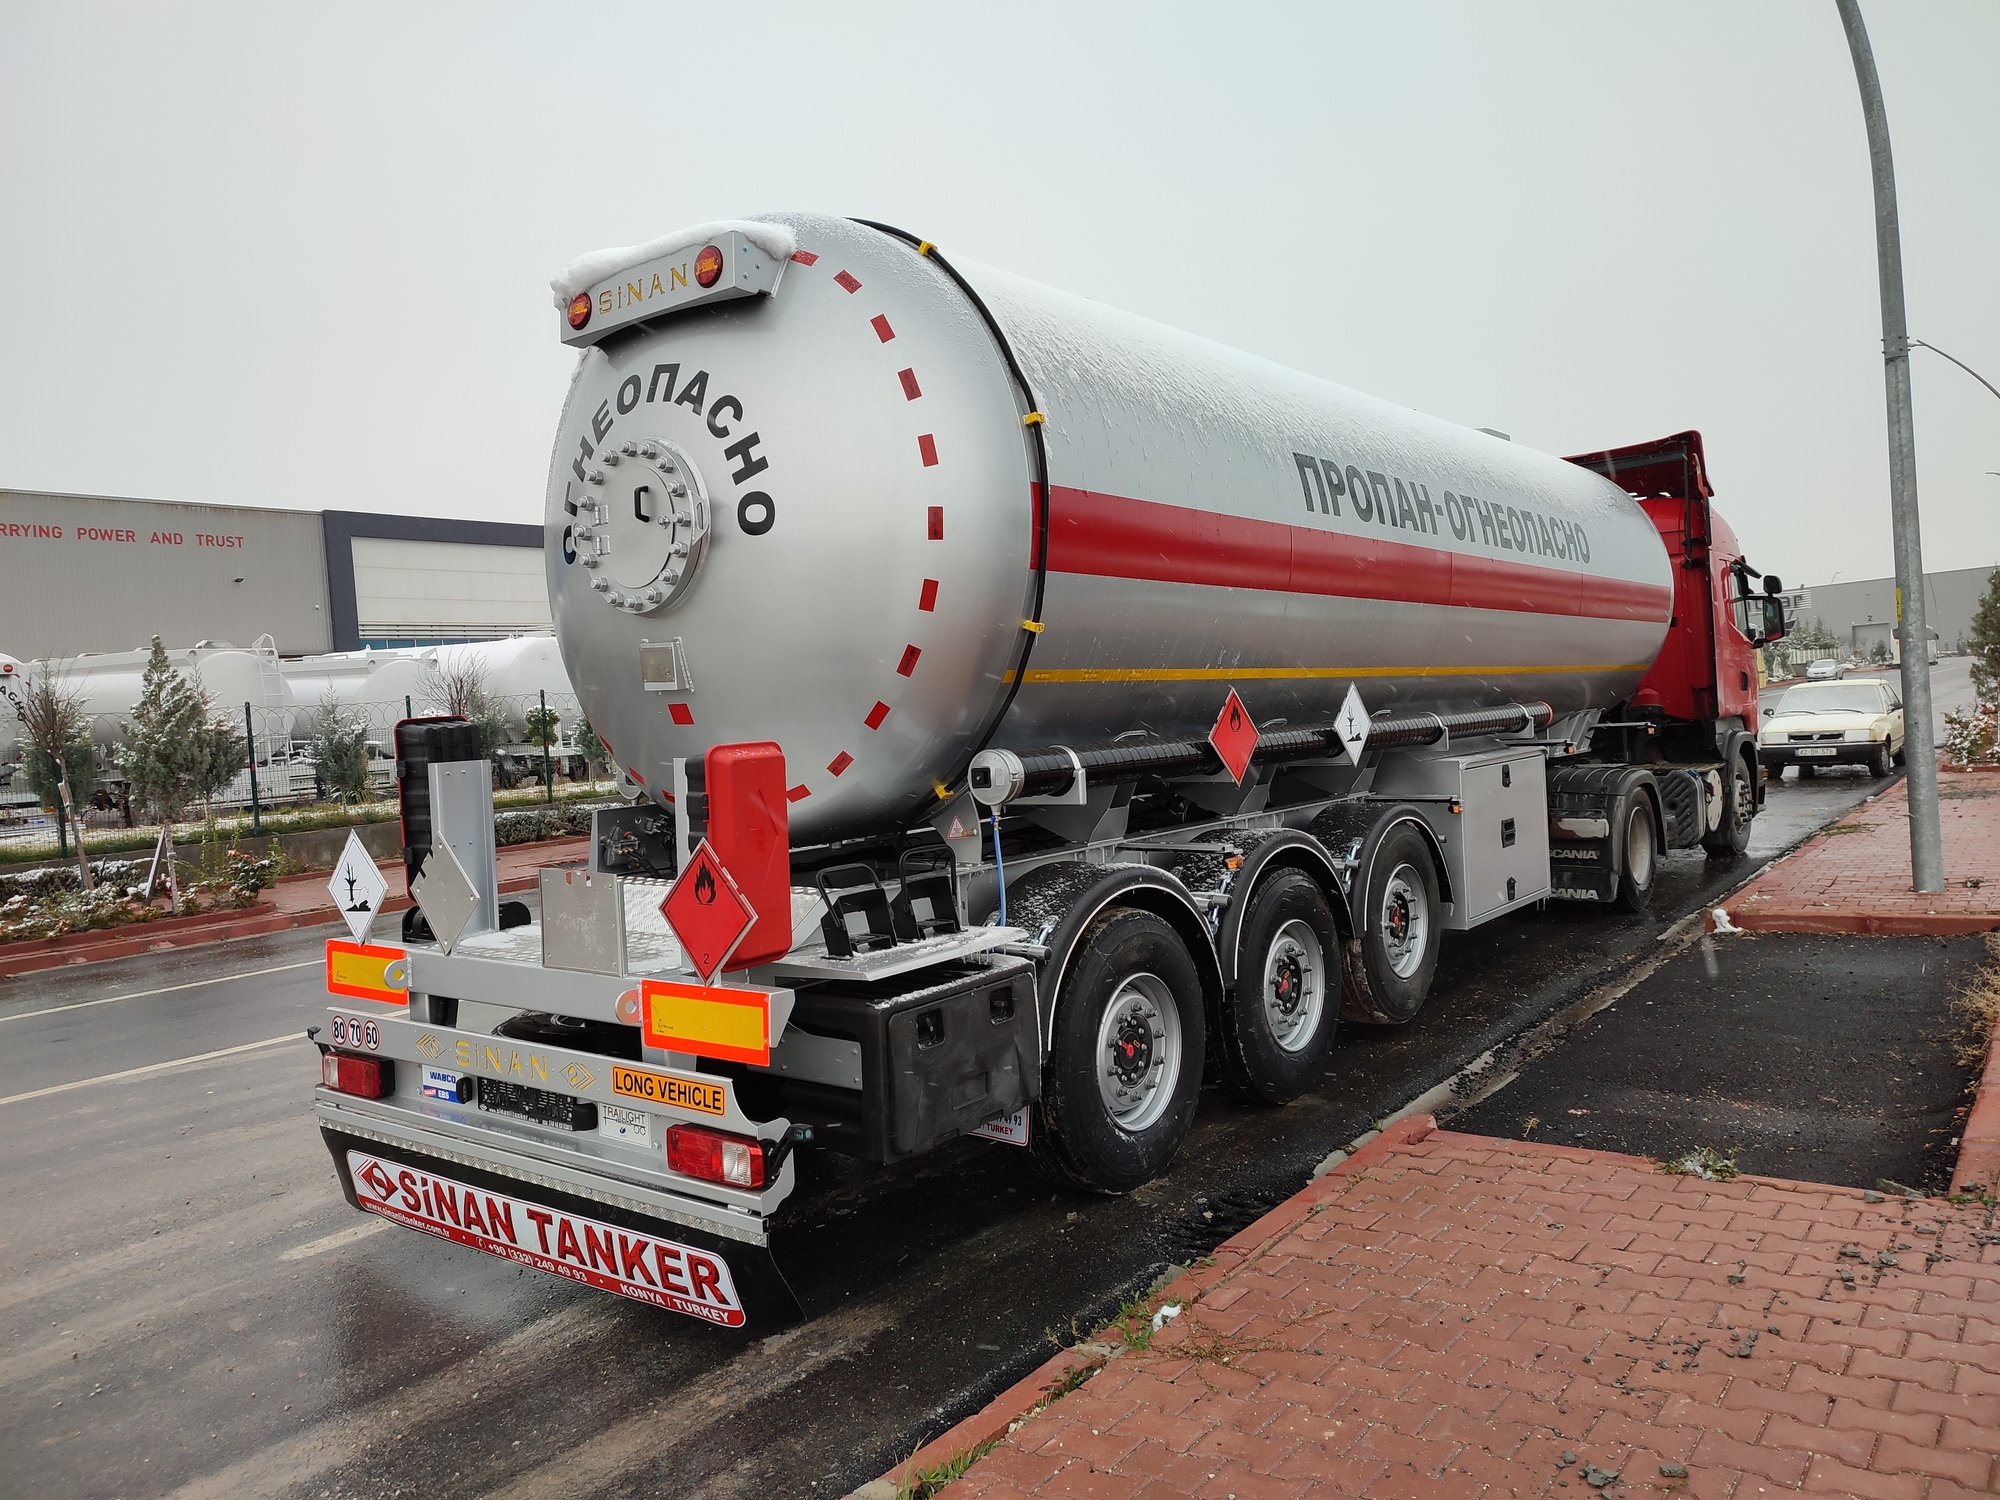 SİNANLI TANKER - TRAILER undefined: photos 43